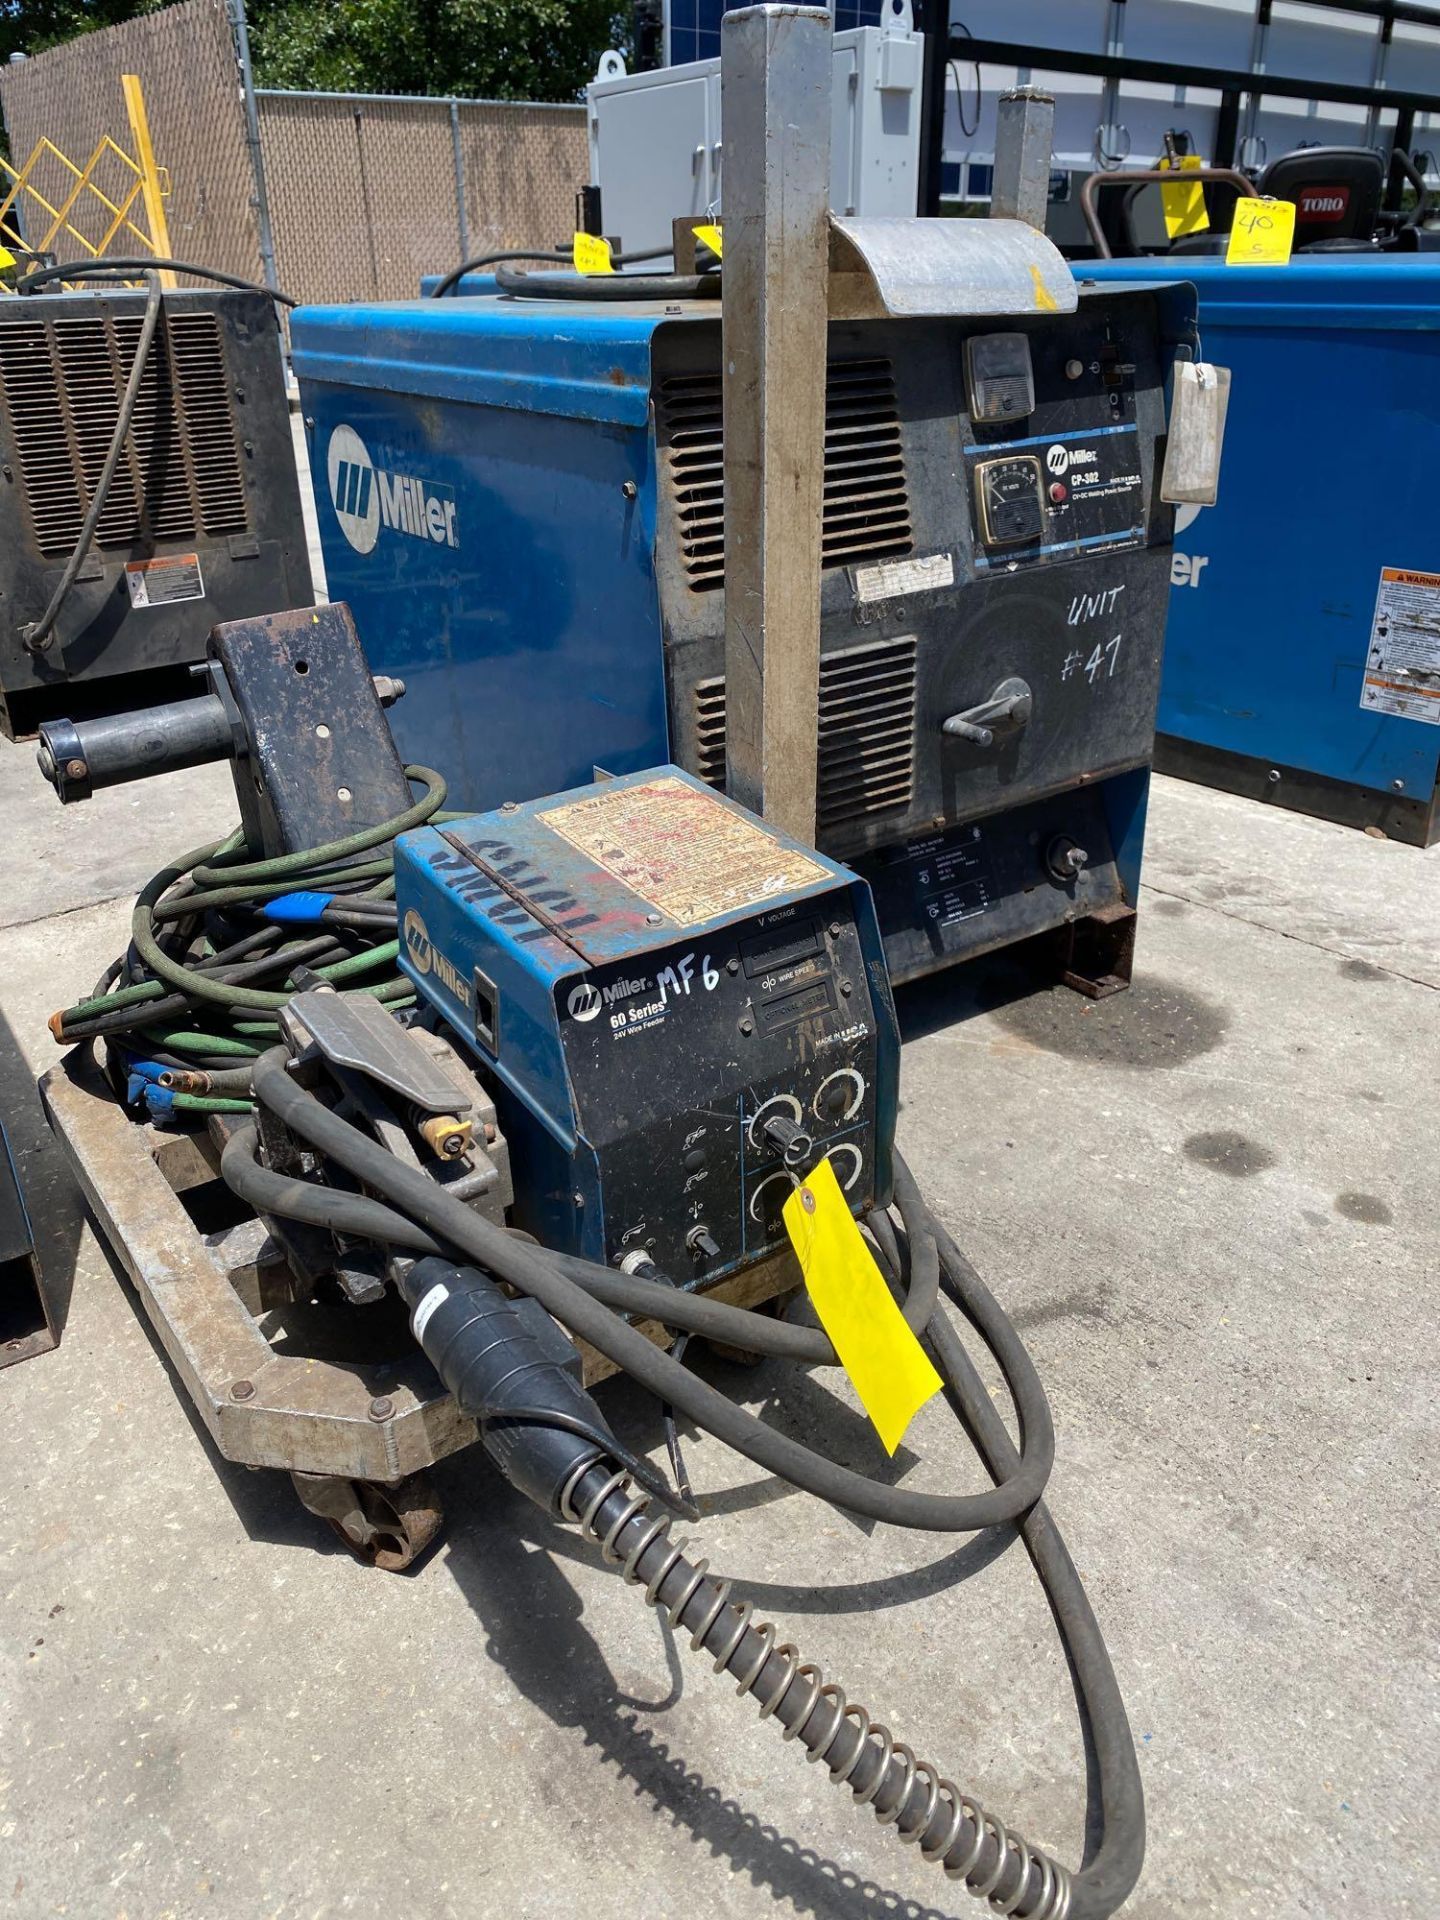 MILLER CP-302 ELECTRIC WELDER WITH MILLER 60 SERIES 24V WIRE FEEDER AND CABLES/CORDS - Image 4 of 10